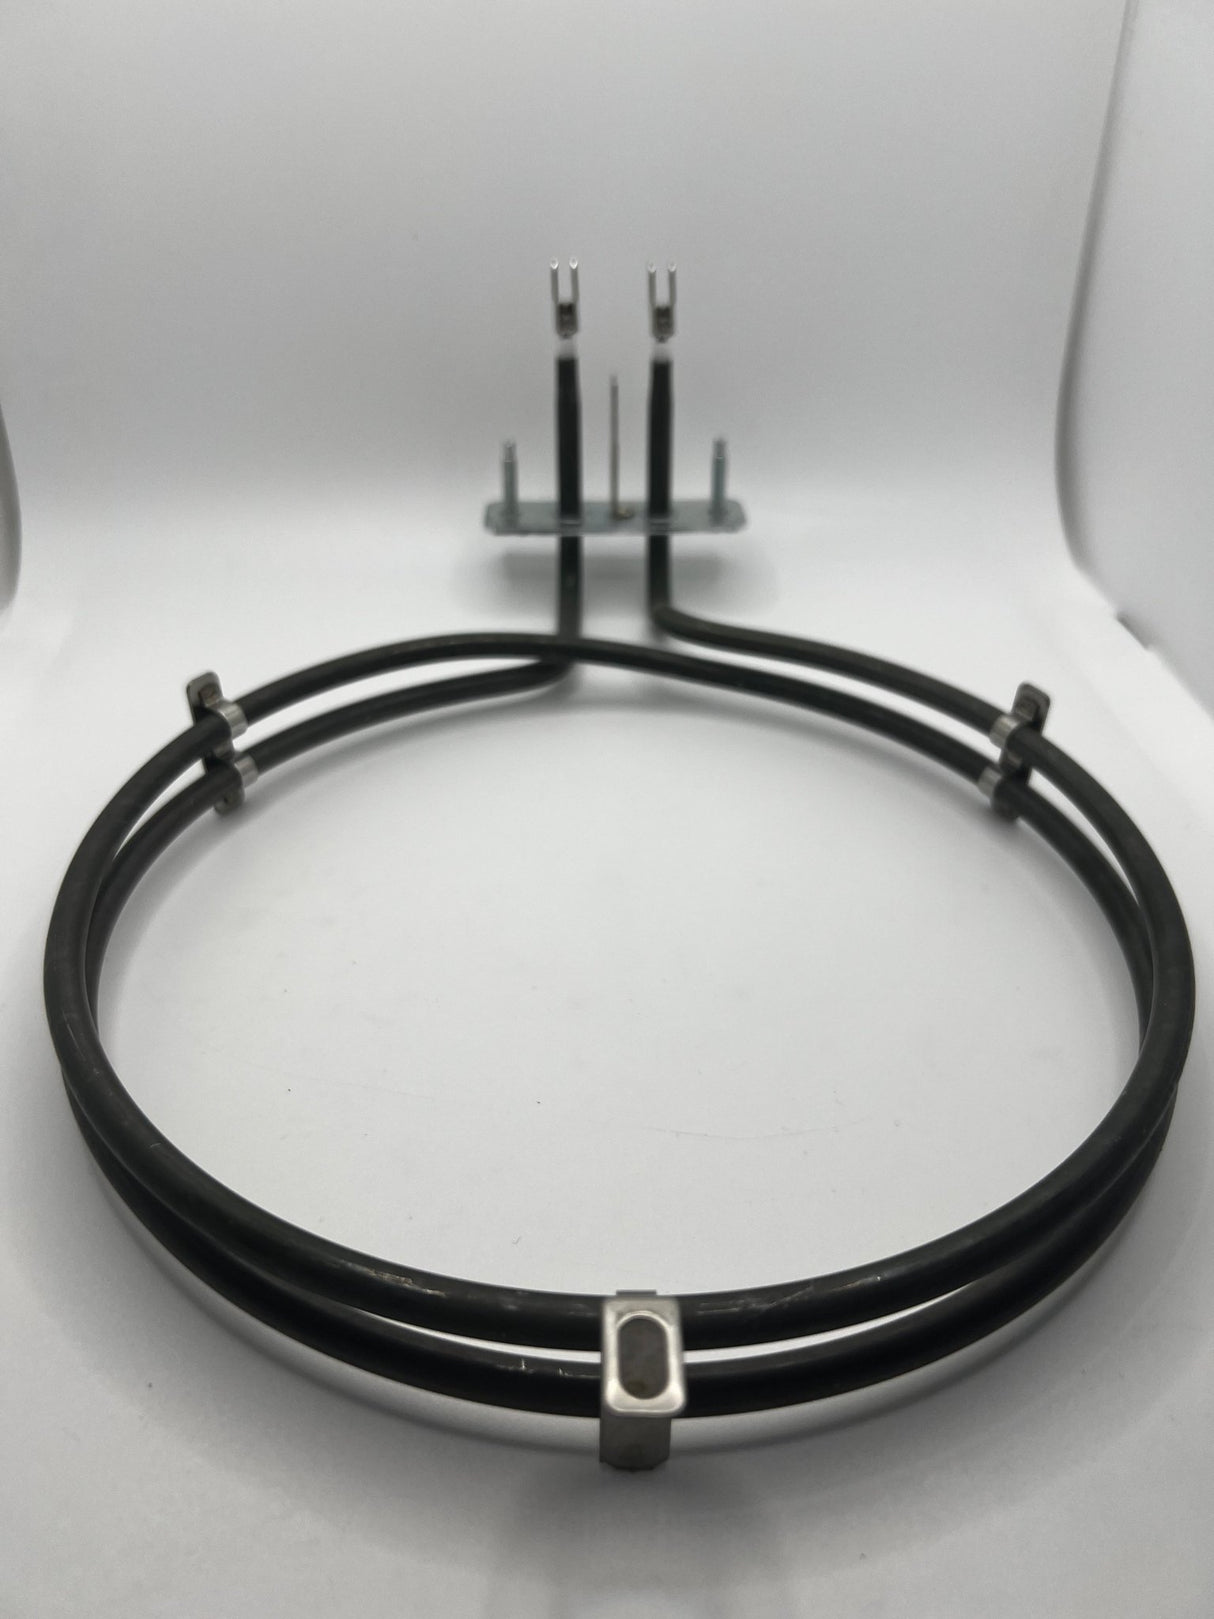 Blanco & Kleenmaid Fan Forced Oven Element 2000W 20.35202.000 - My Oven Spares-Blanco-20.35202.000-3